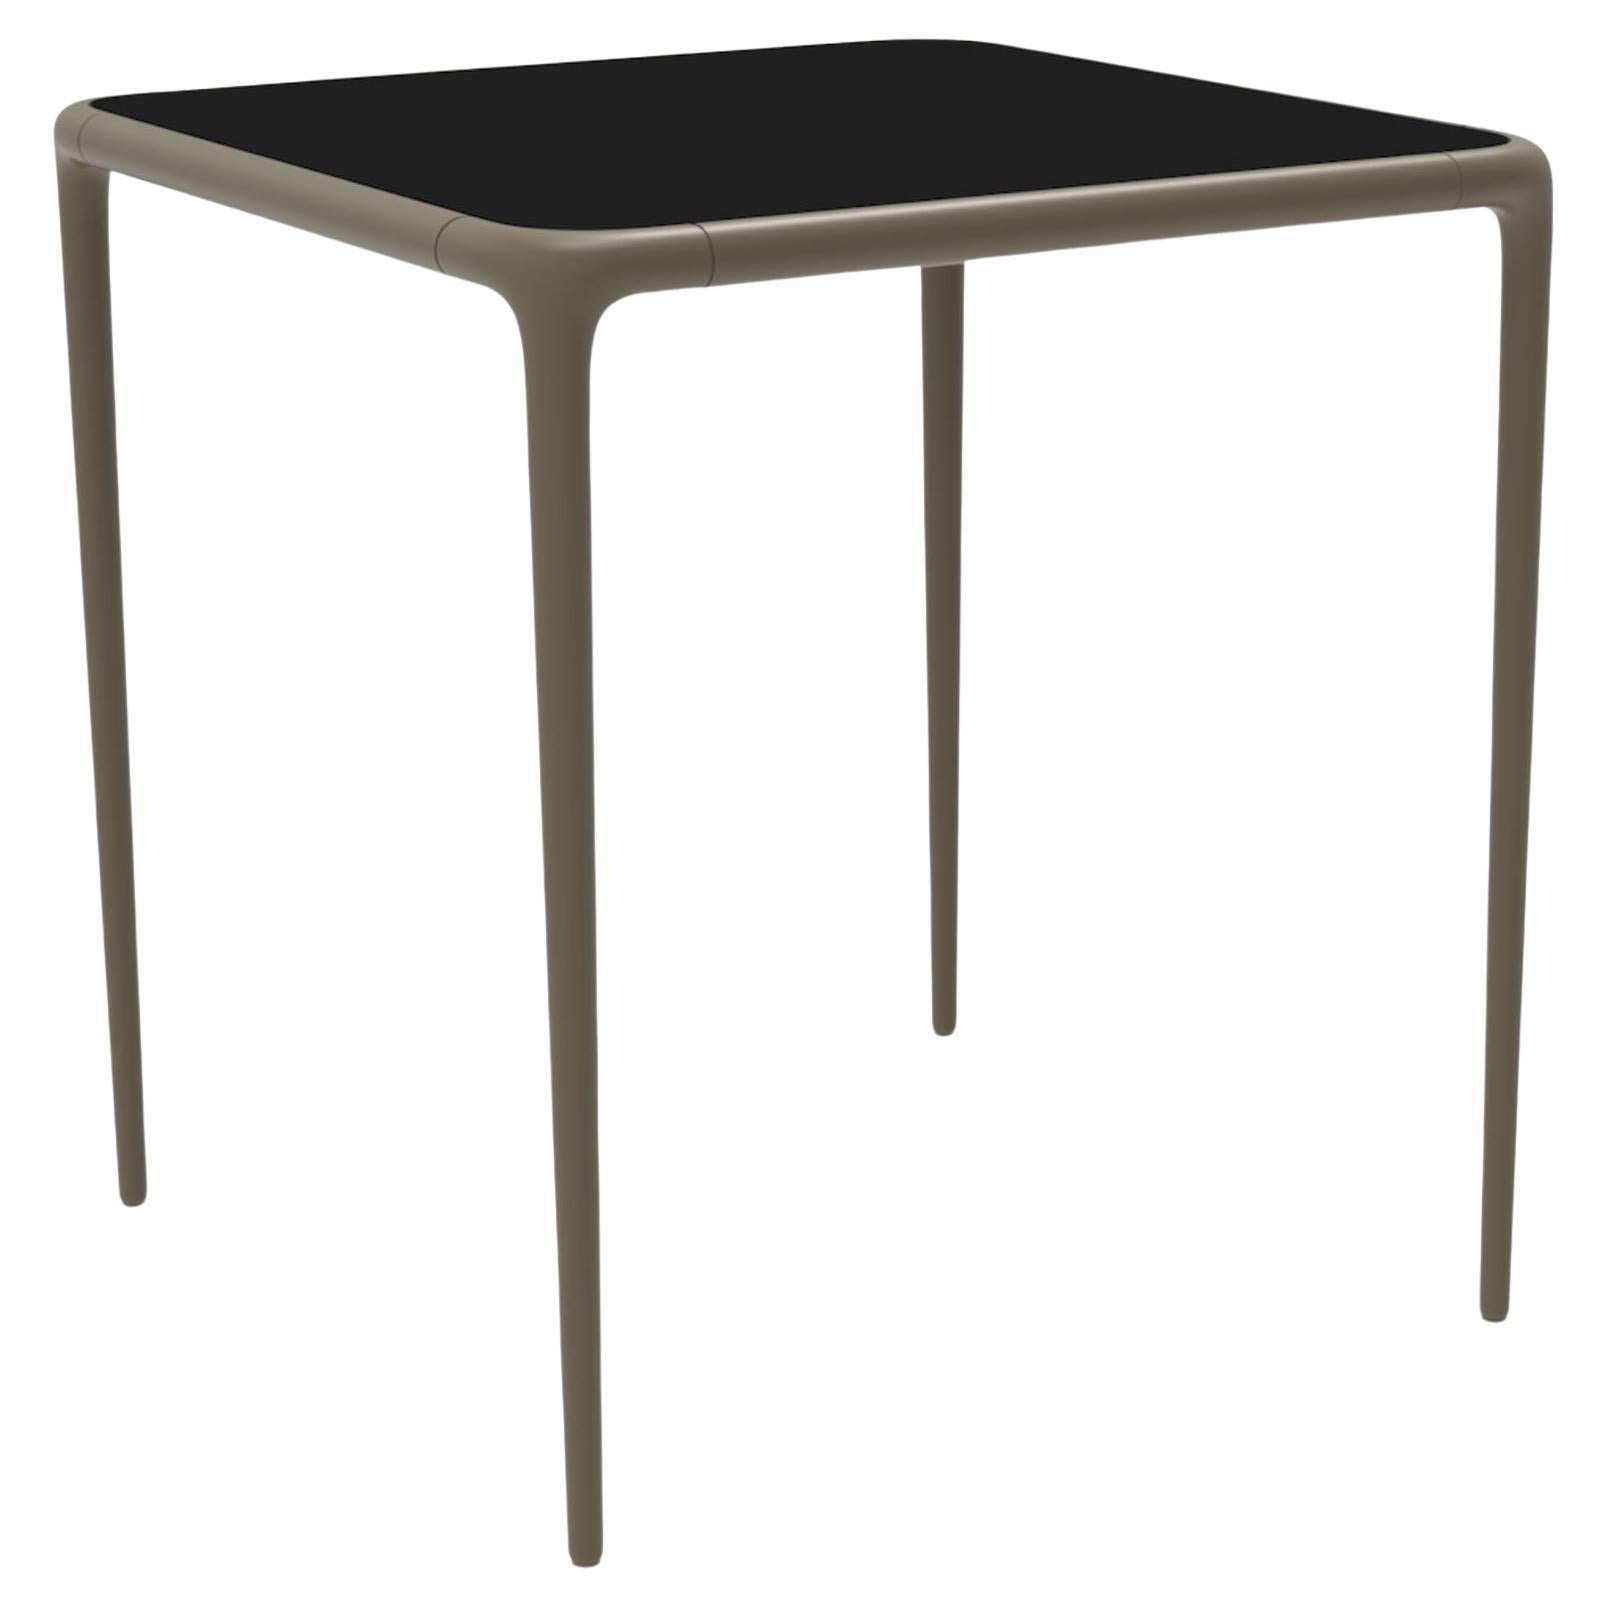 Xaloc Bronze Glass Top Table 70 by Mowee For Sale